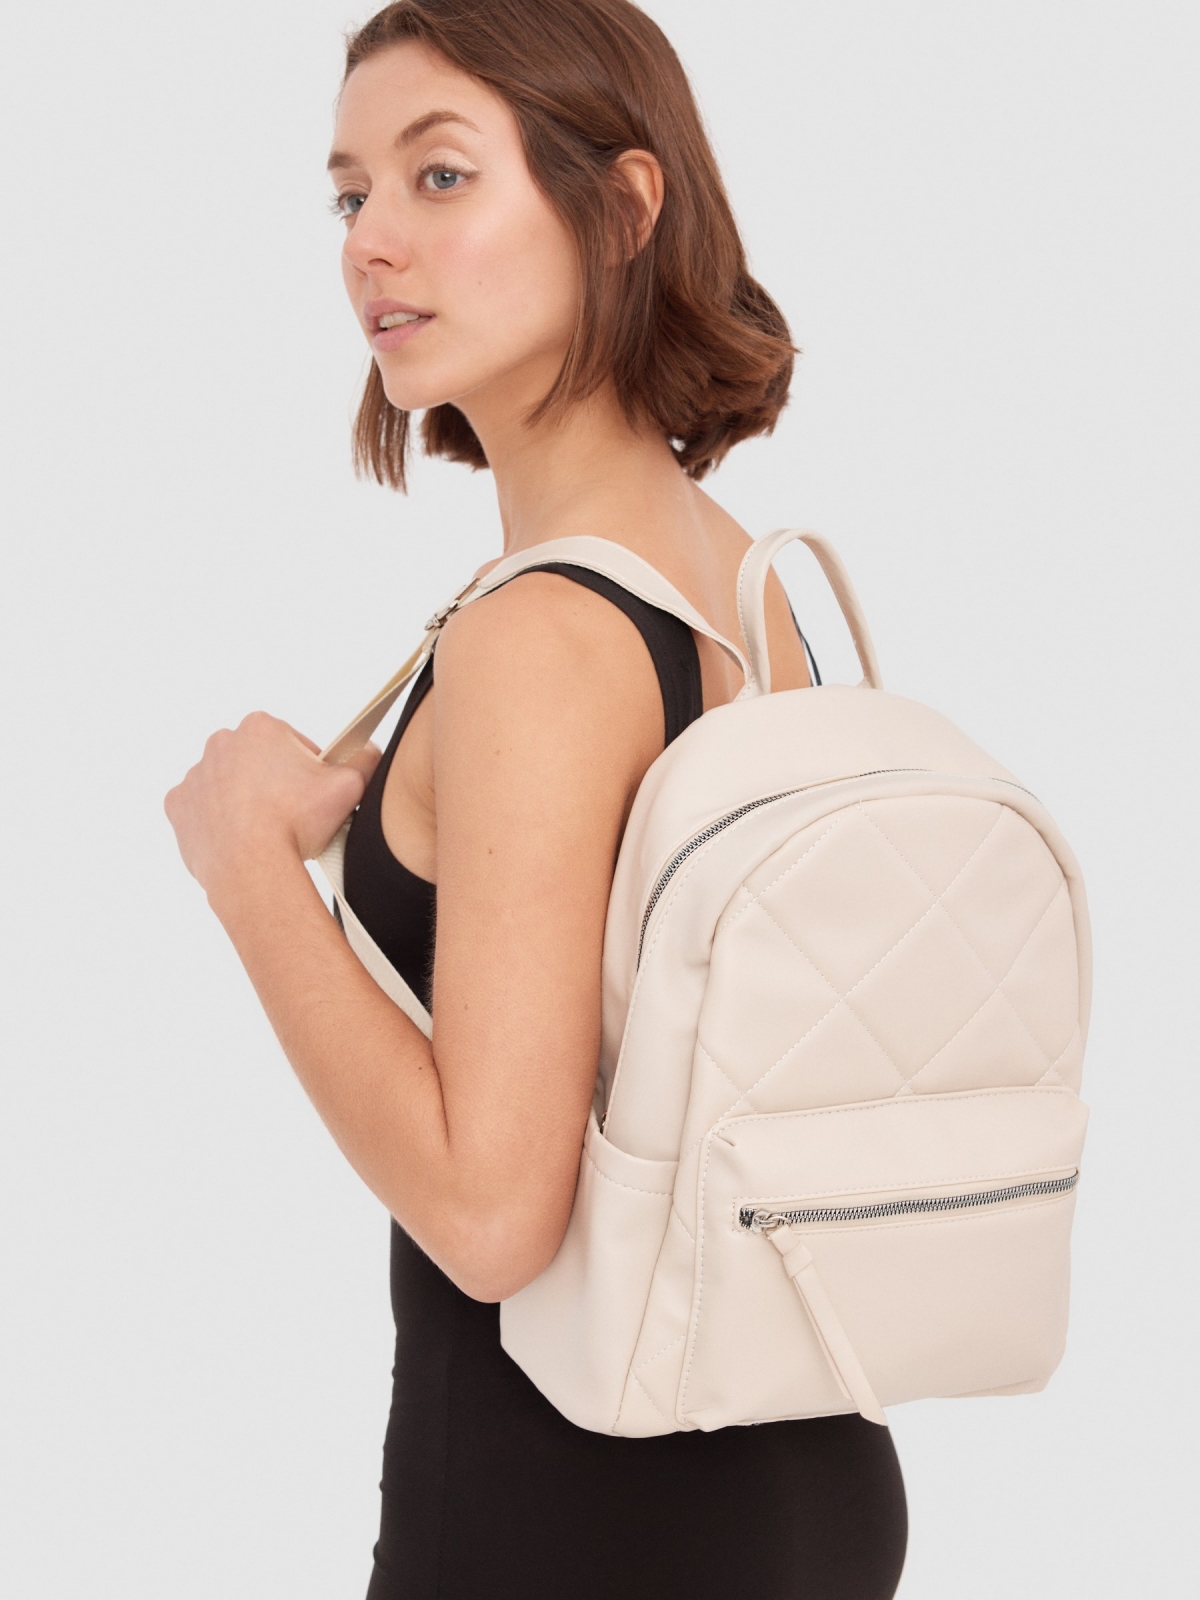 Leatherette backpack white with a model